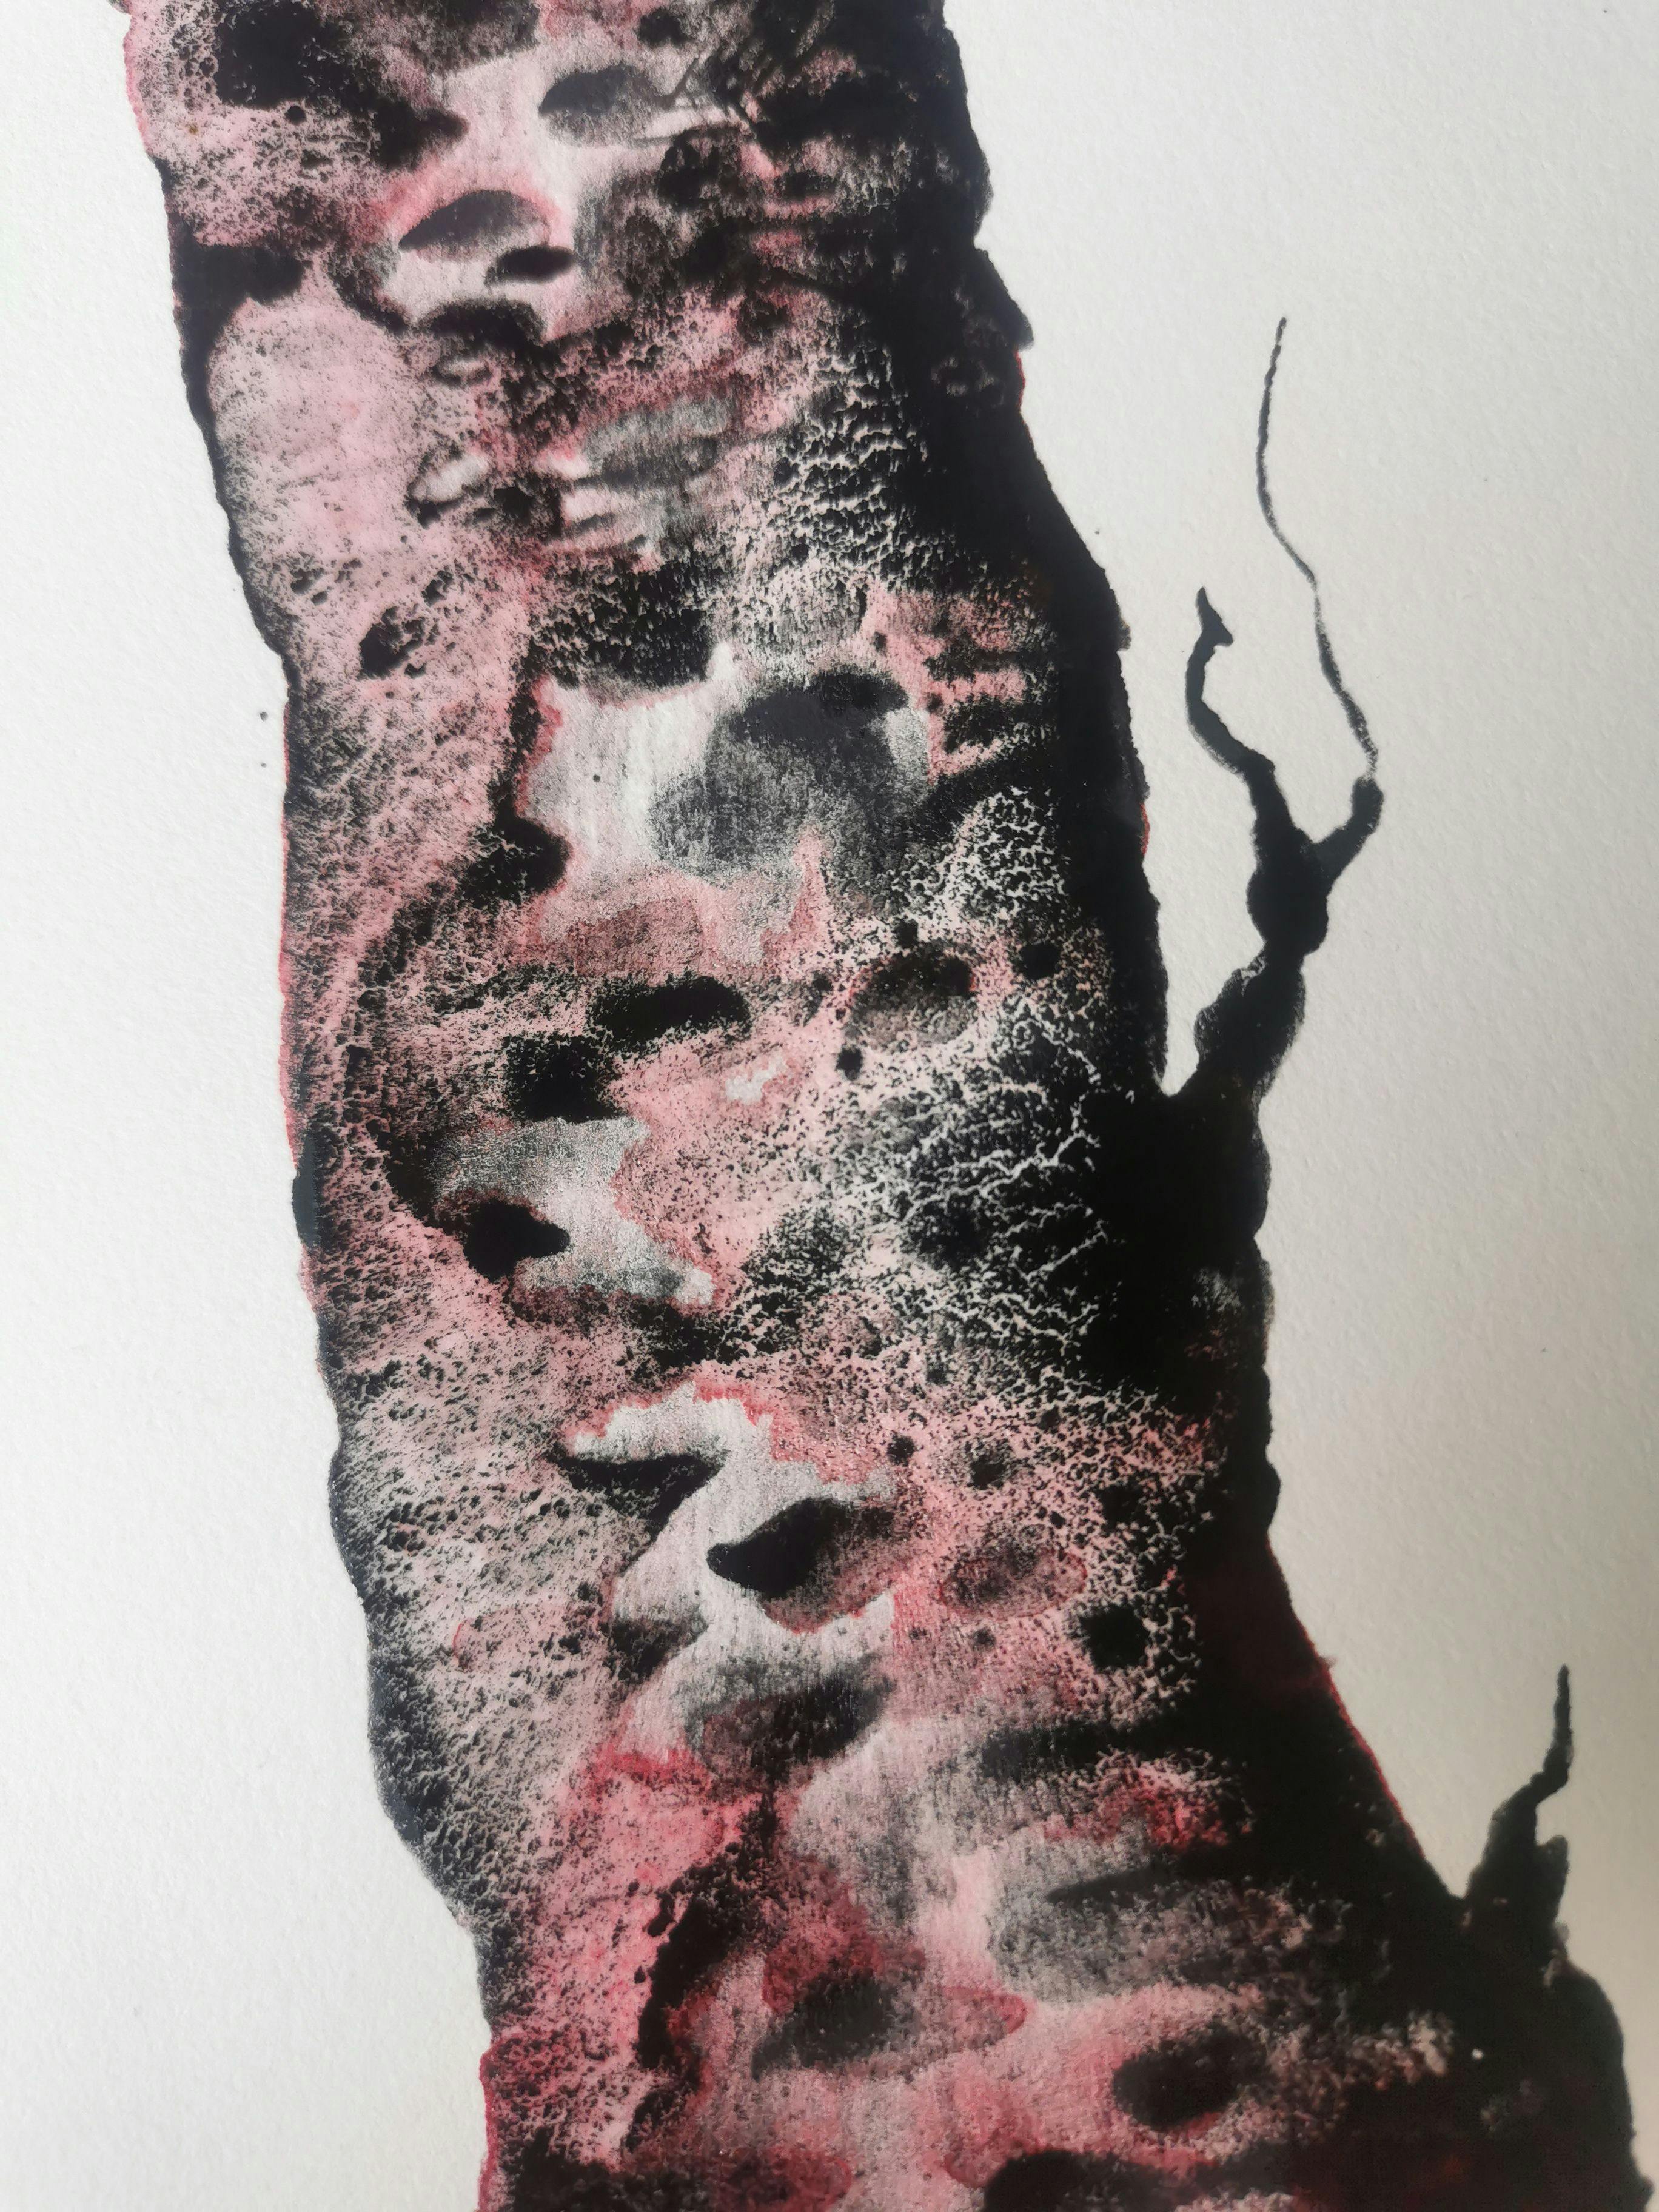 Watercolour painting in black, gray and red, depicting an abstract tree trunk